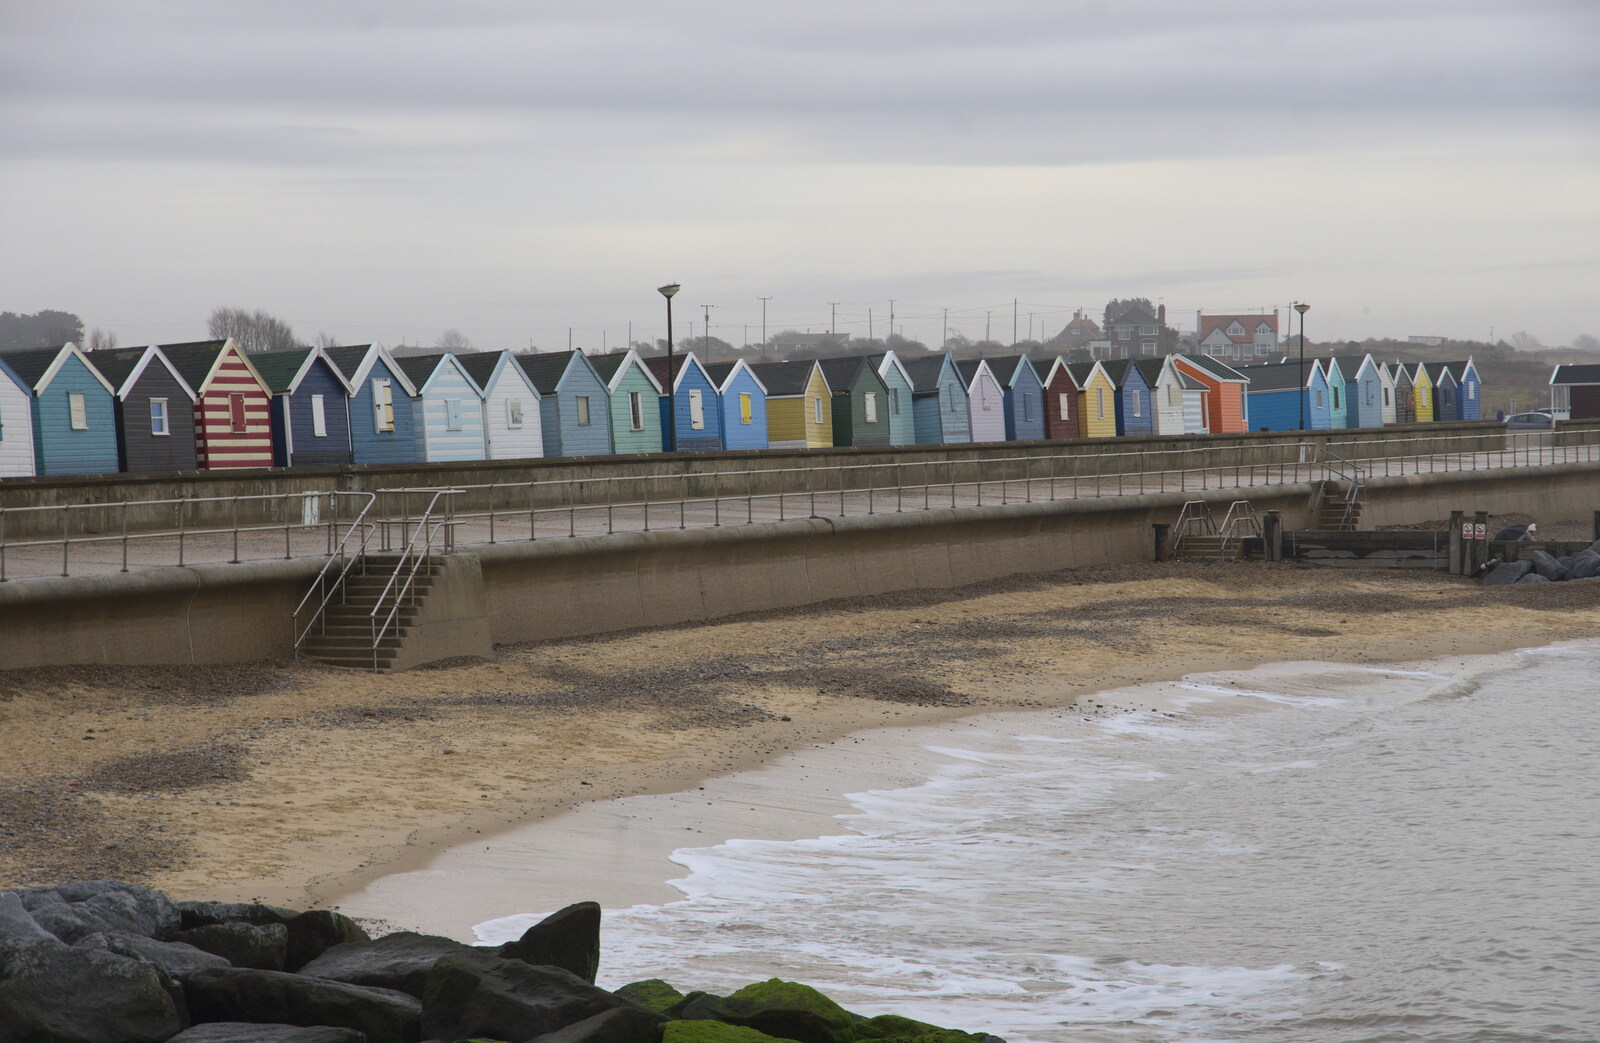 Beach huts are piled into the car park for winter from A Southwold Car Picnic, Southwold, Suffolk - 11th March 2018